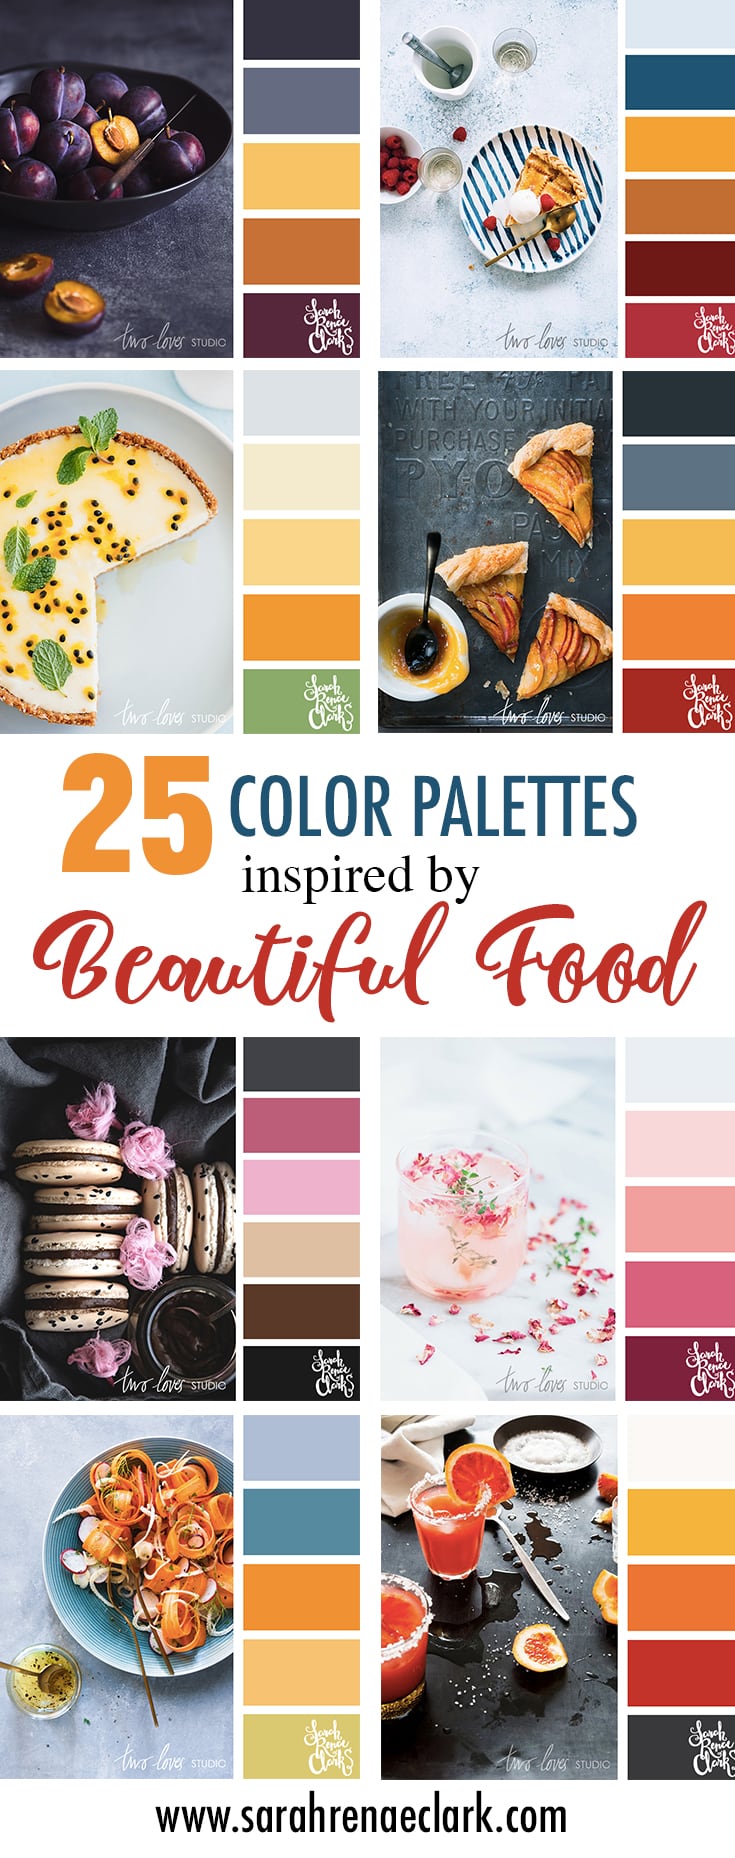 25 Color Palettes Inspired by Beautiful Food